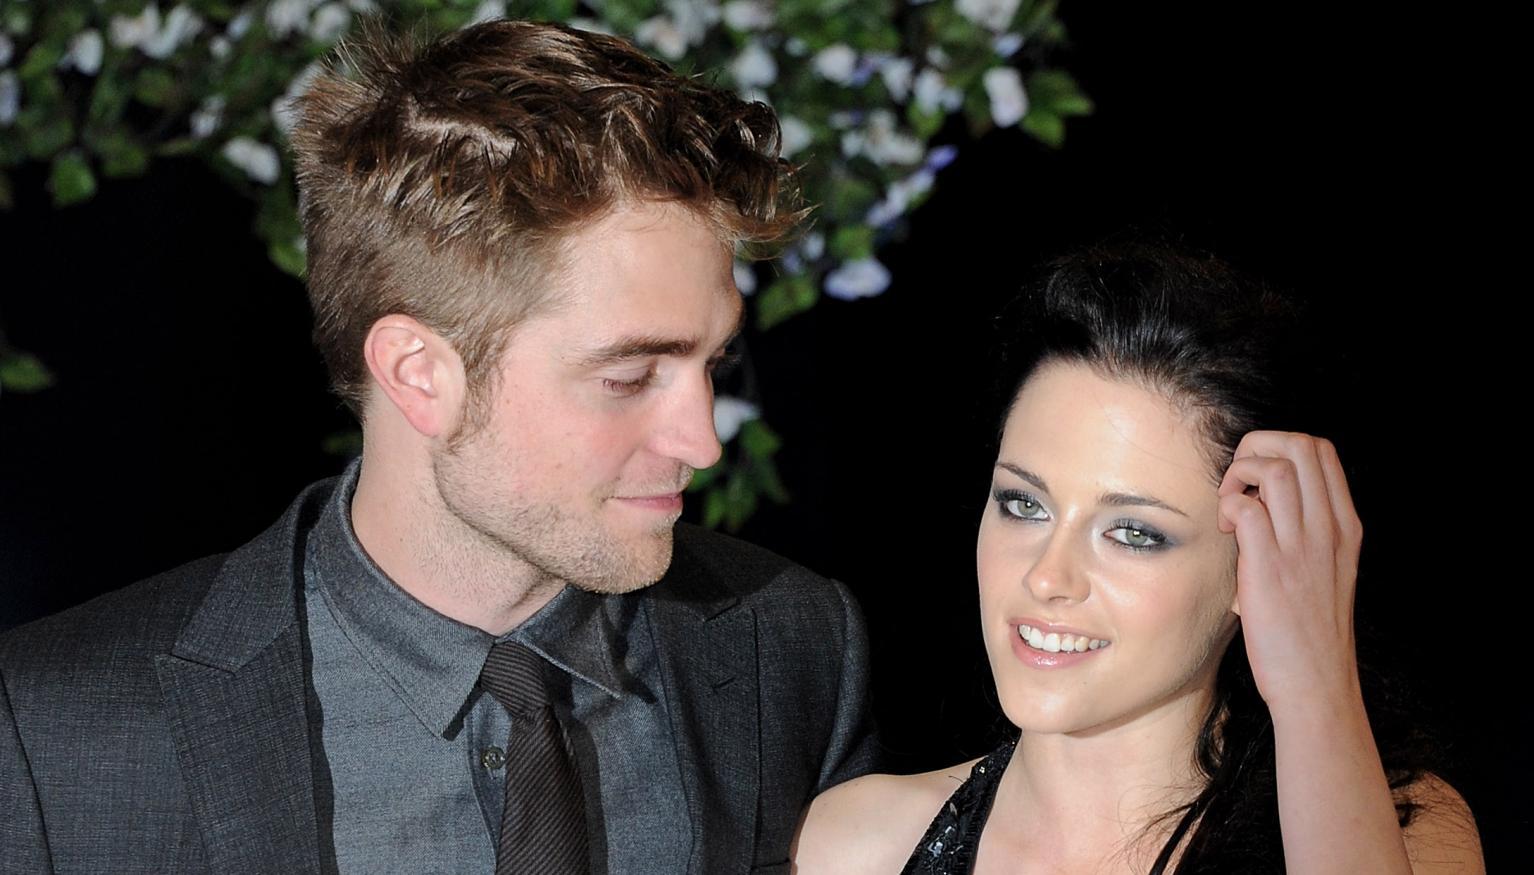 Robert Pattinson and Kristen Stewart may be doing a movie together